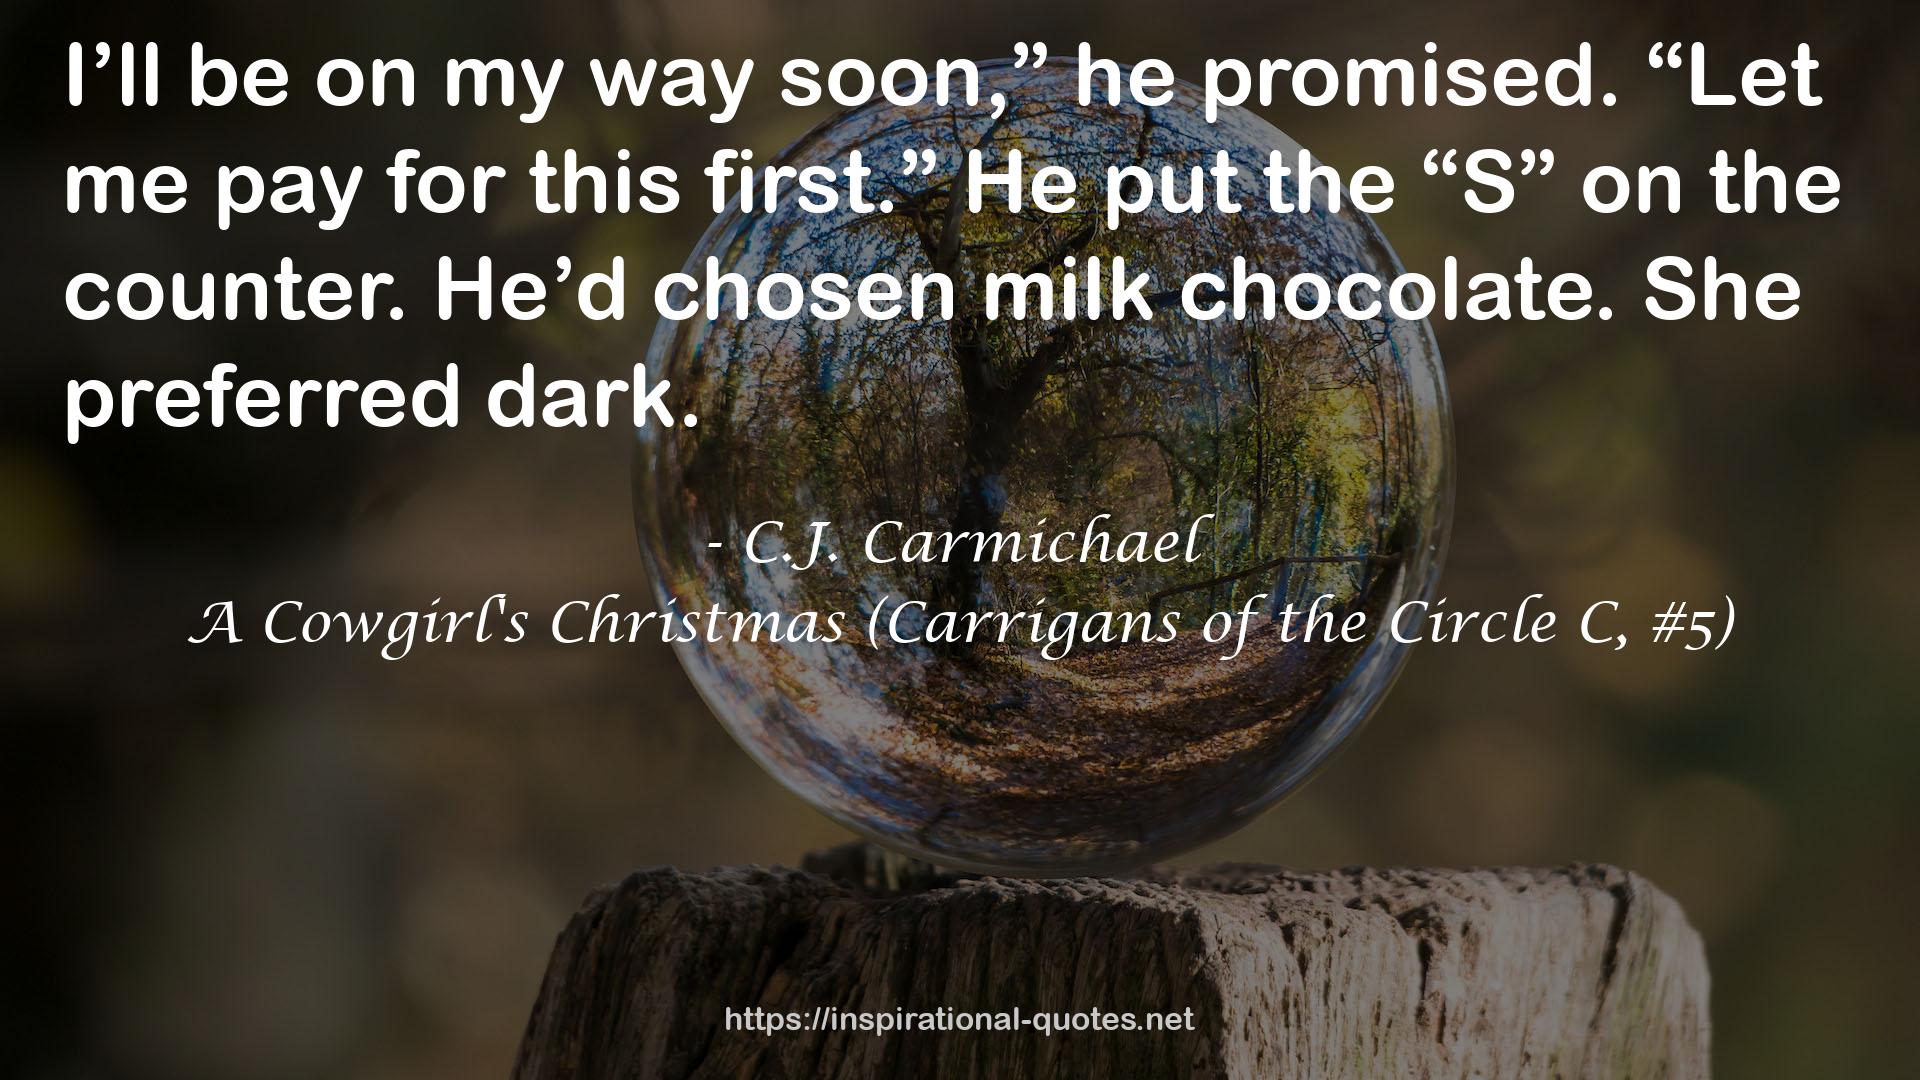 A Cowgirl's Christmas (Carrigans of the Circle C, #5) QUOTES